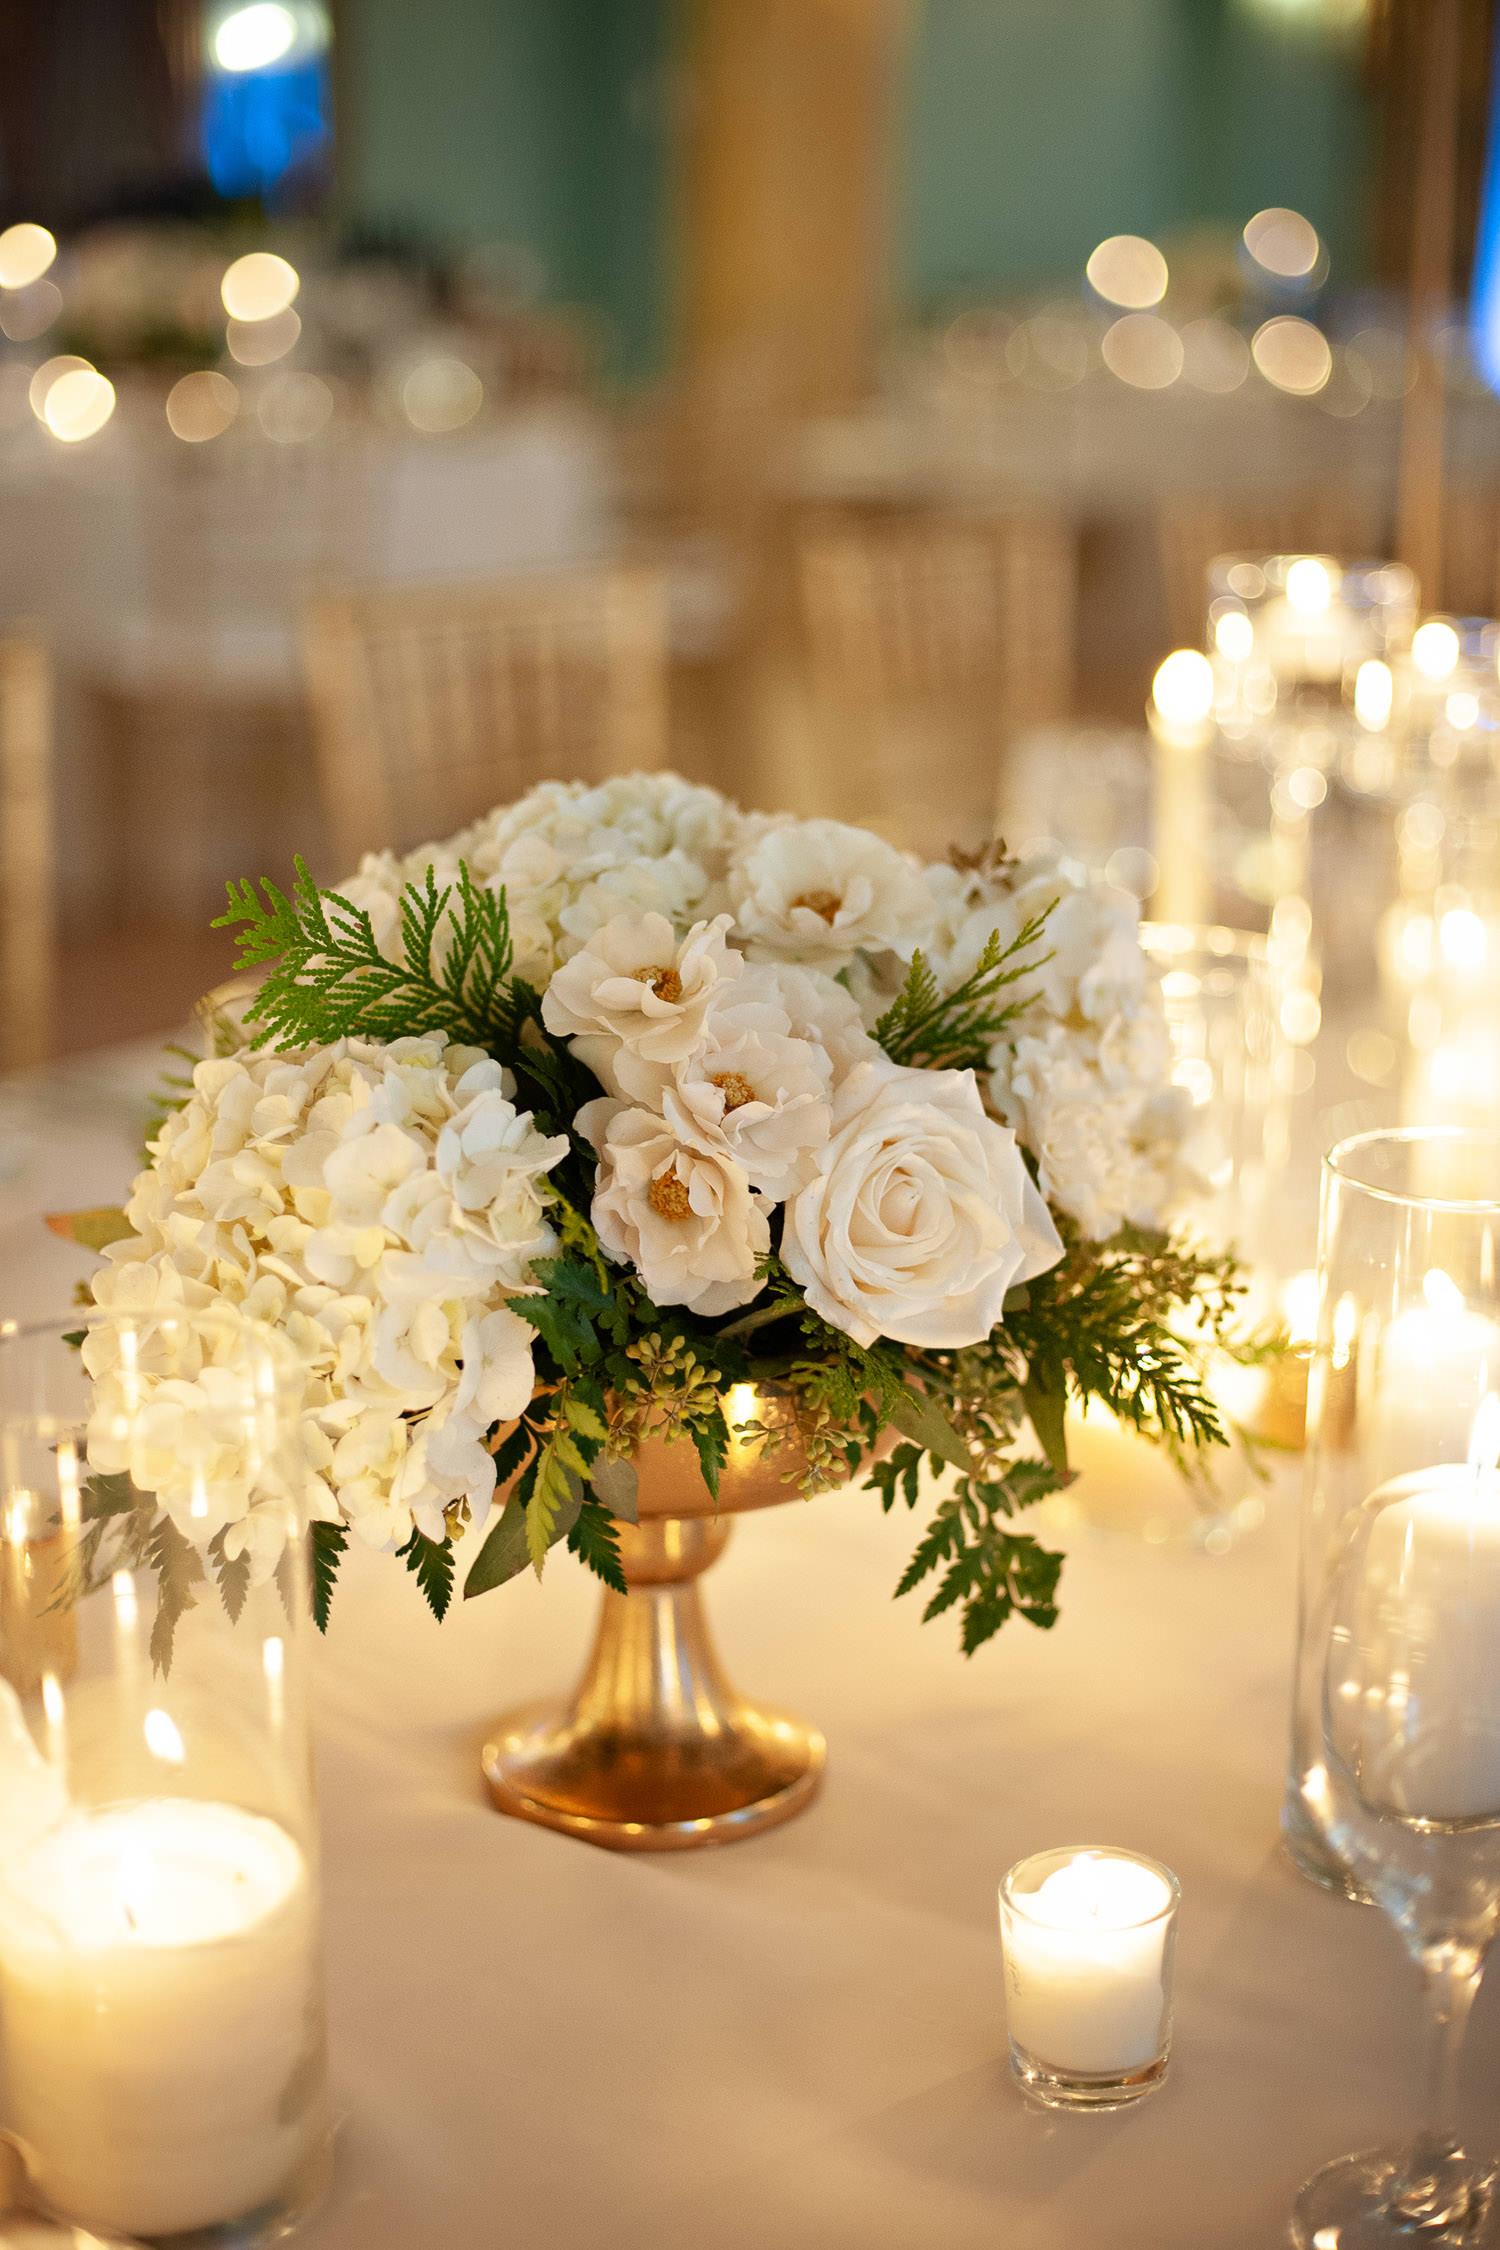 Floral centrepiece from Flowers by Janie at the Banff Springs Hotel captured by Tara Whittaker Photography